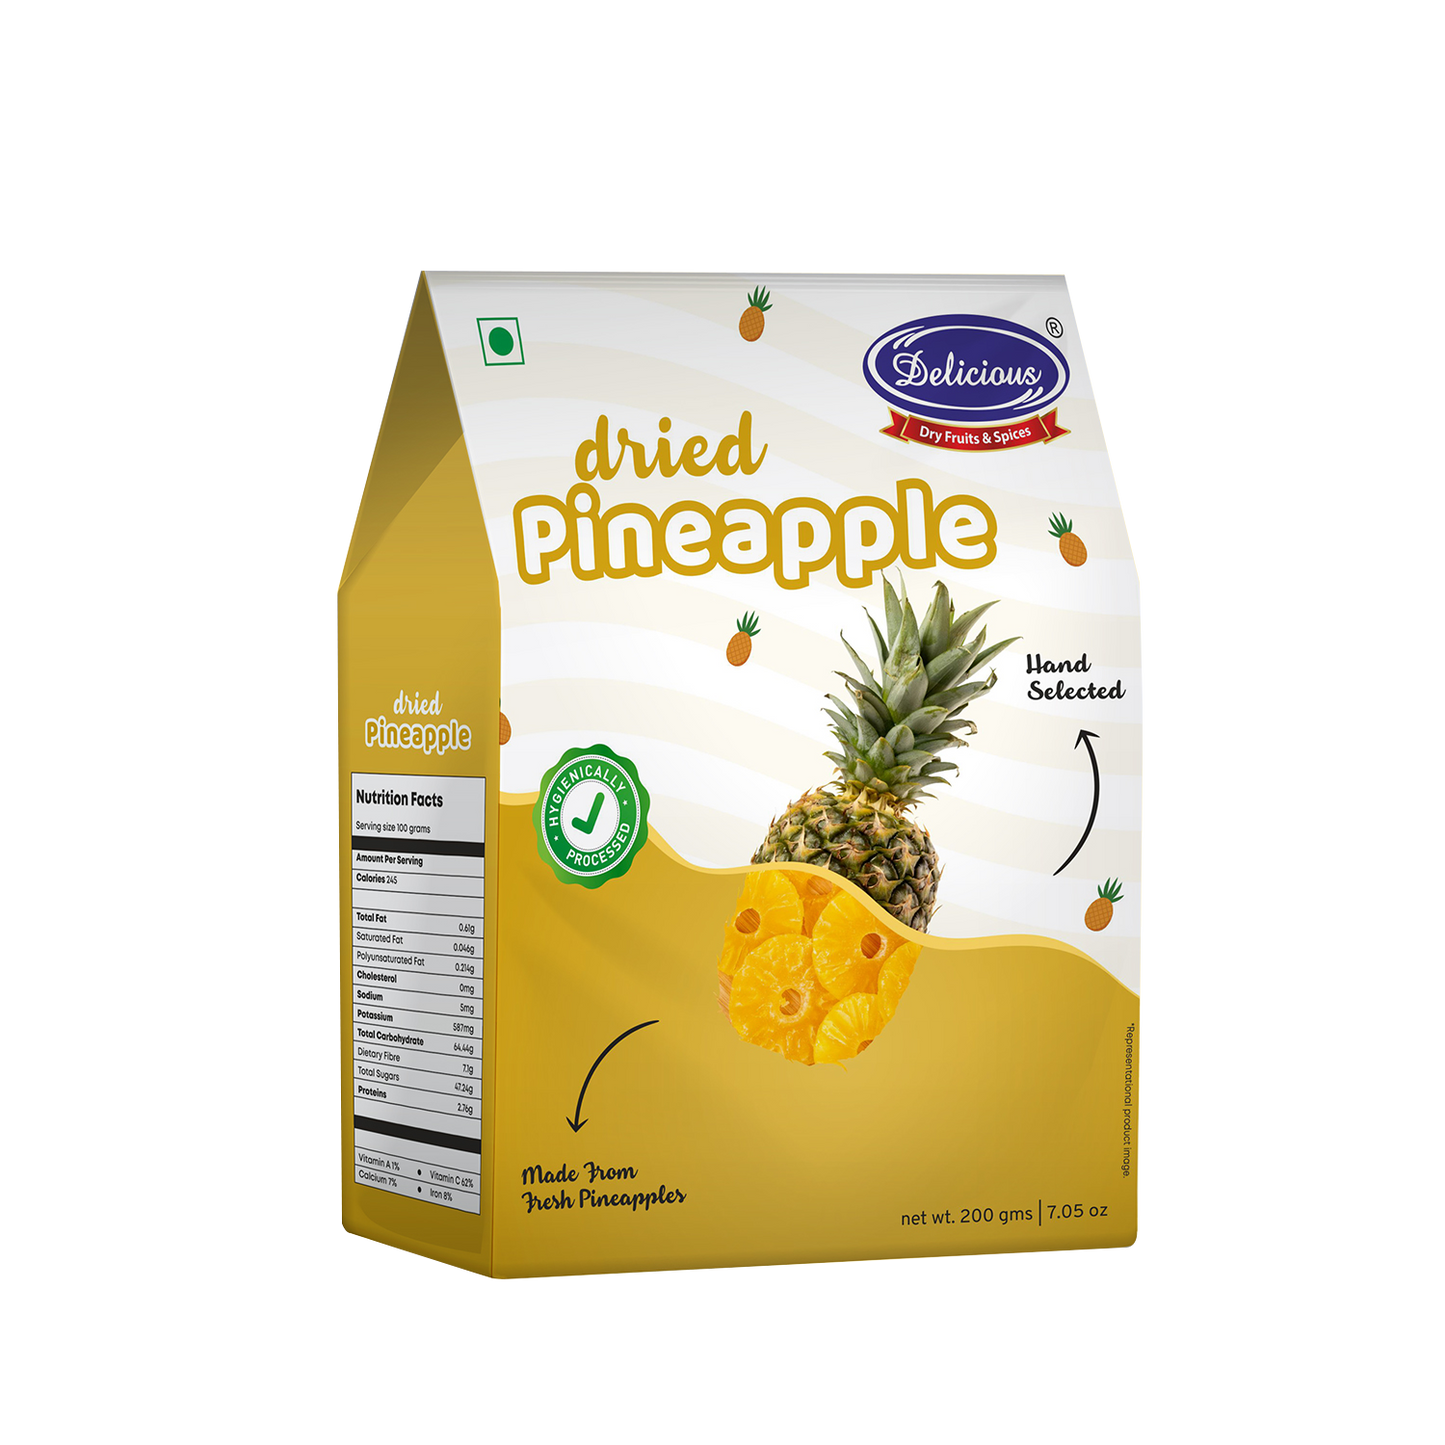 Delicious Dried Pineapple